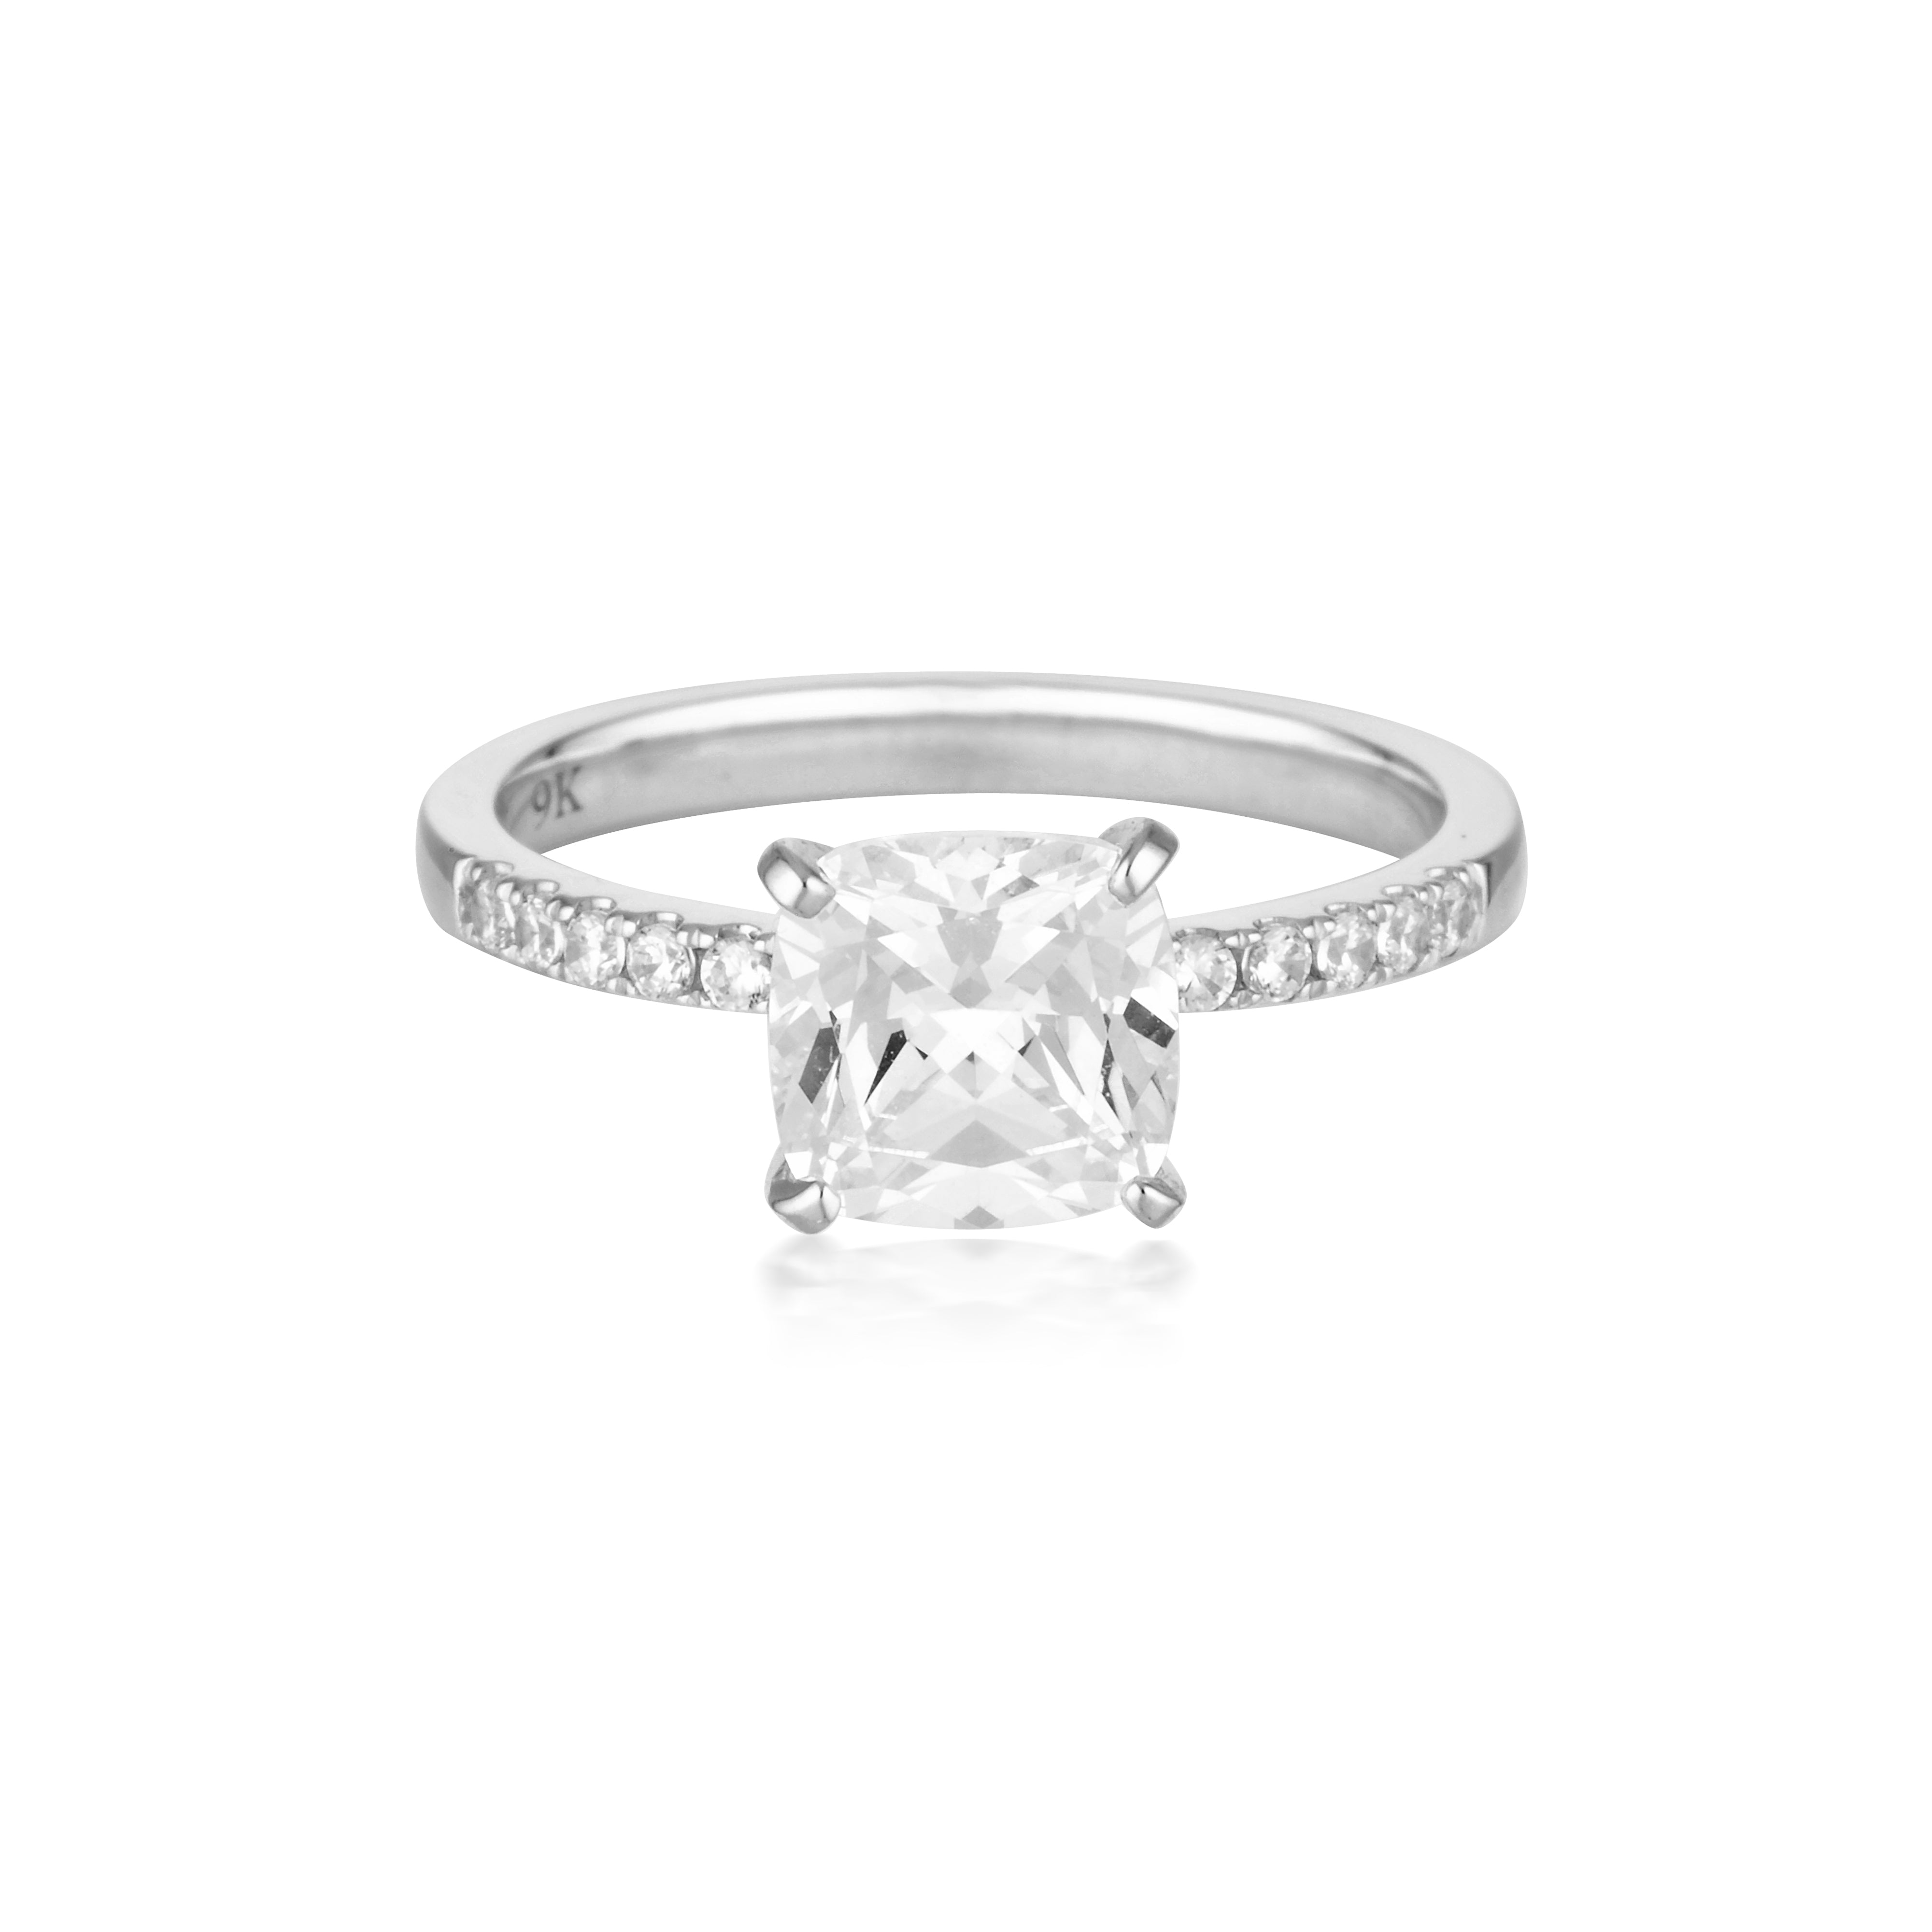 Cushion Cut 1.5tcw Moissanite Engagement Ring in 9ct White Gold